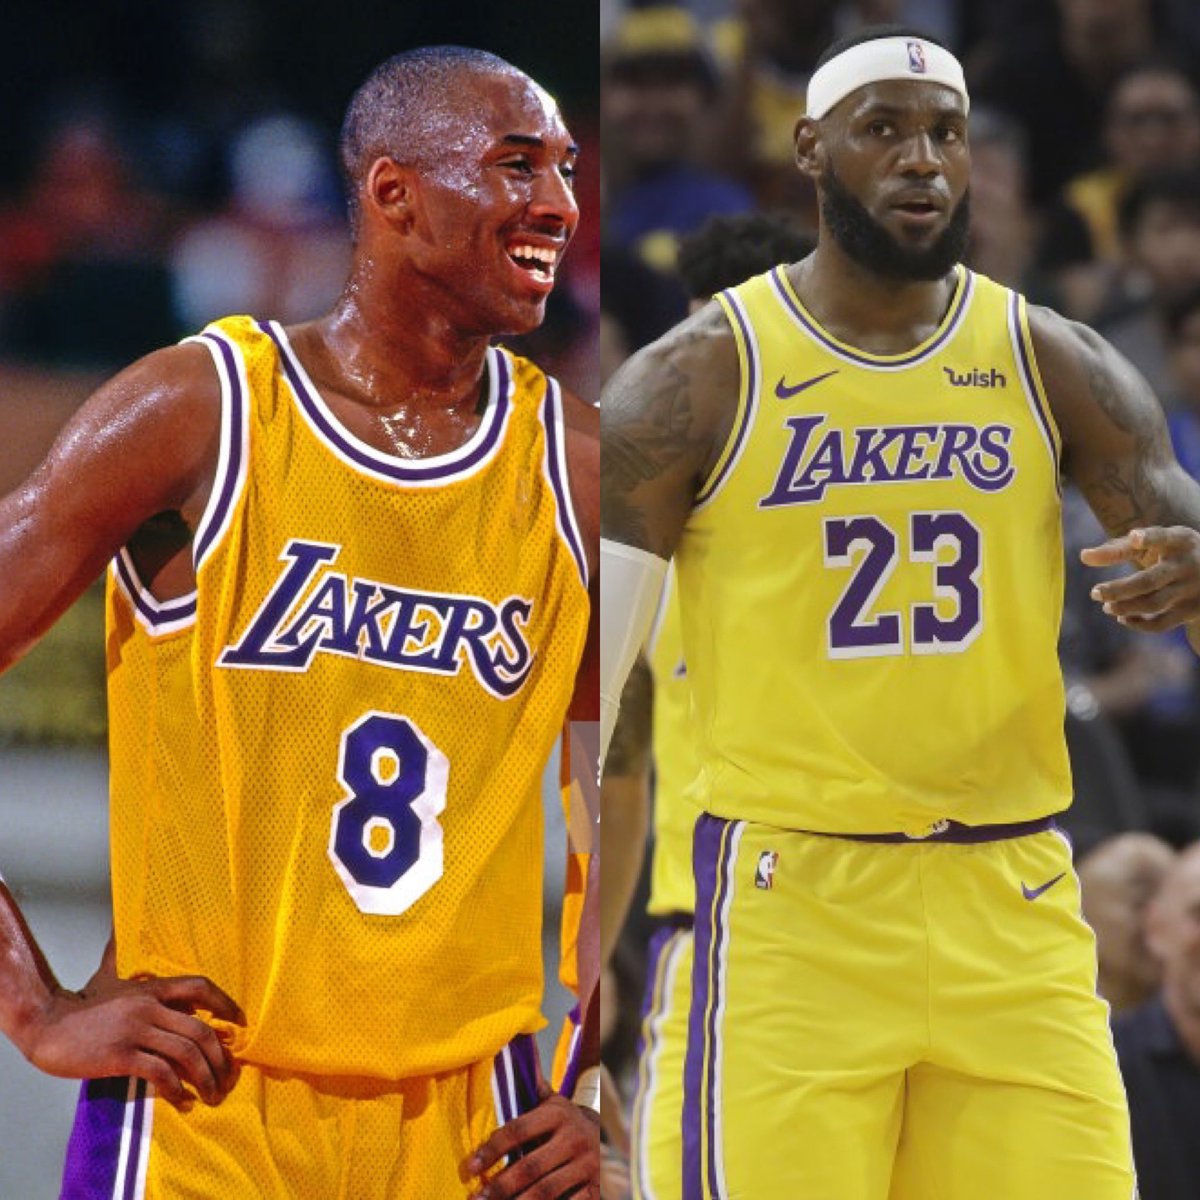 Can we make a petition to change the color of the jerseys , from banana  yellow to original lakers gold. Please Nike and Lakers, I will buy a jersey  if you do. 